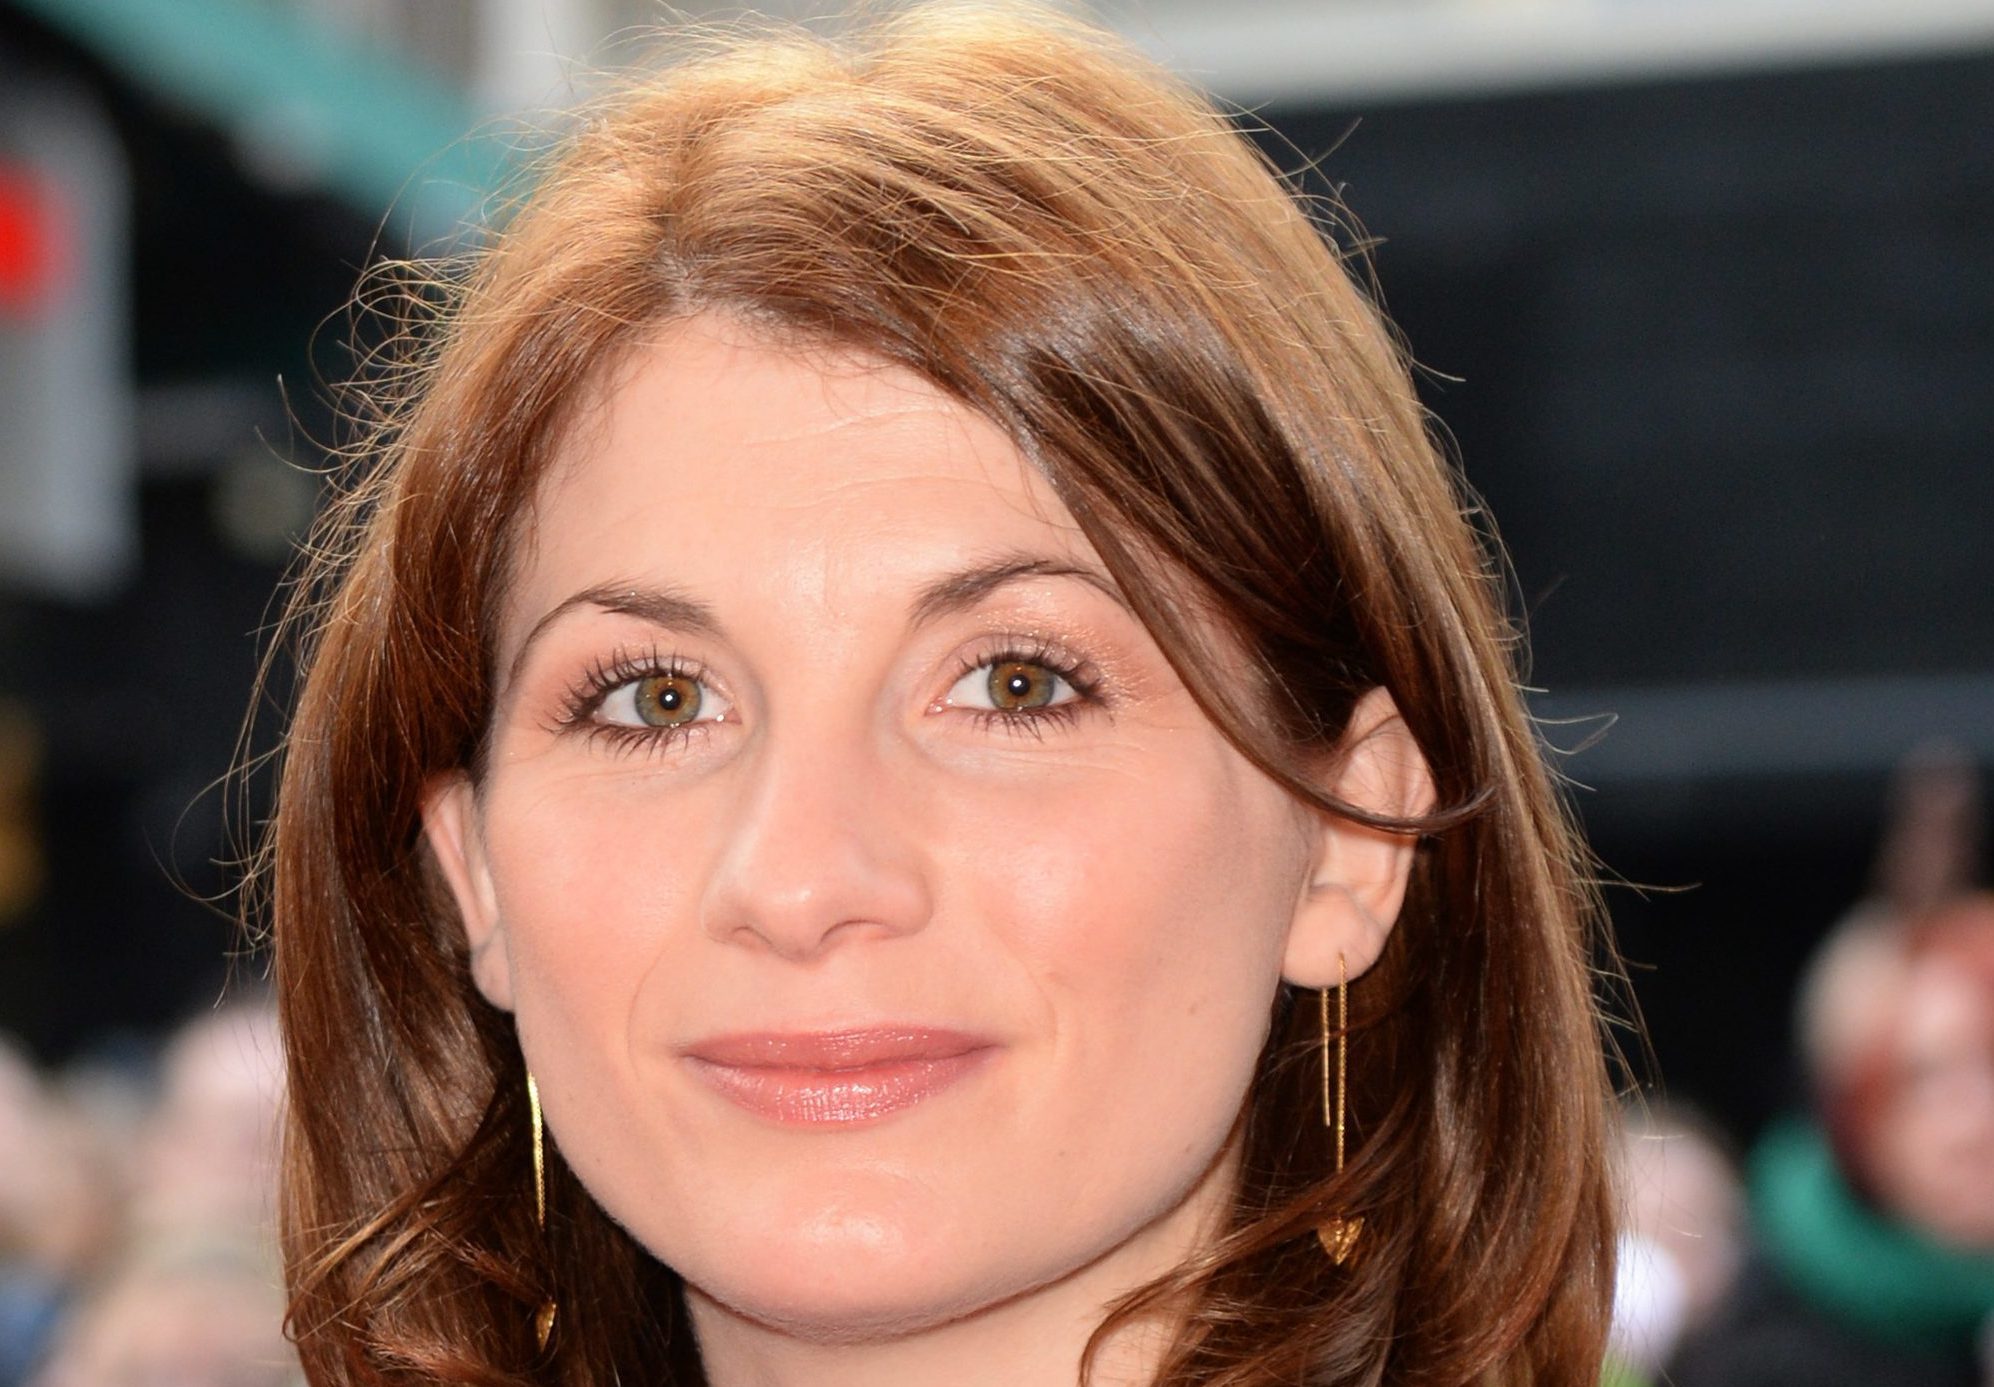 Dr Who? Jodie Whittaker has arrived!